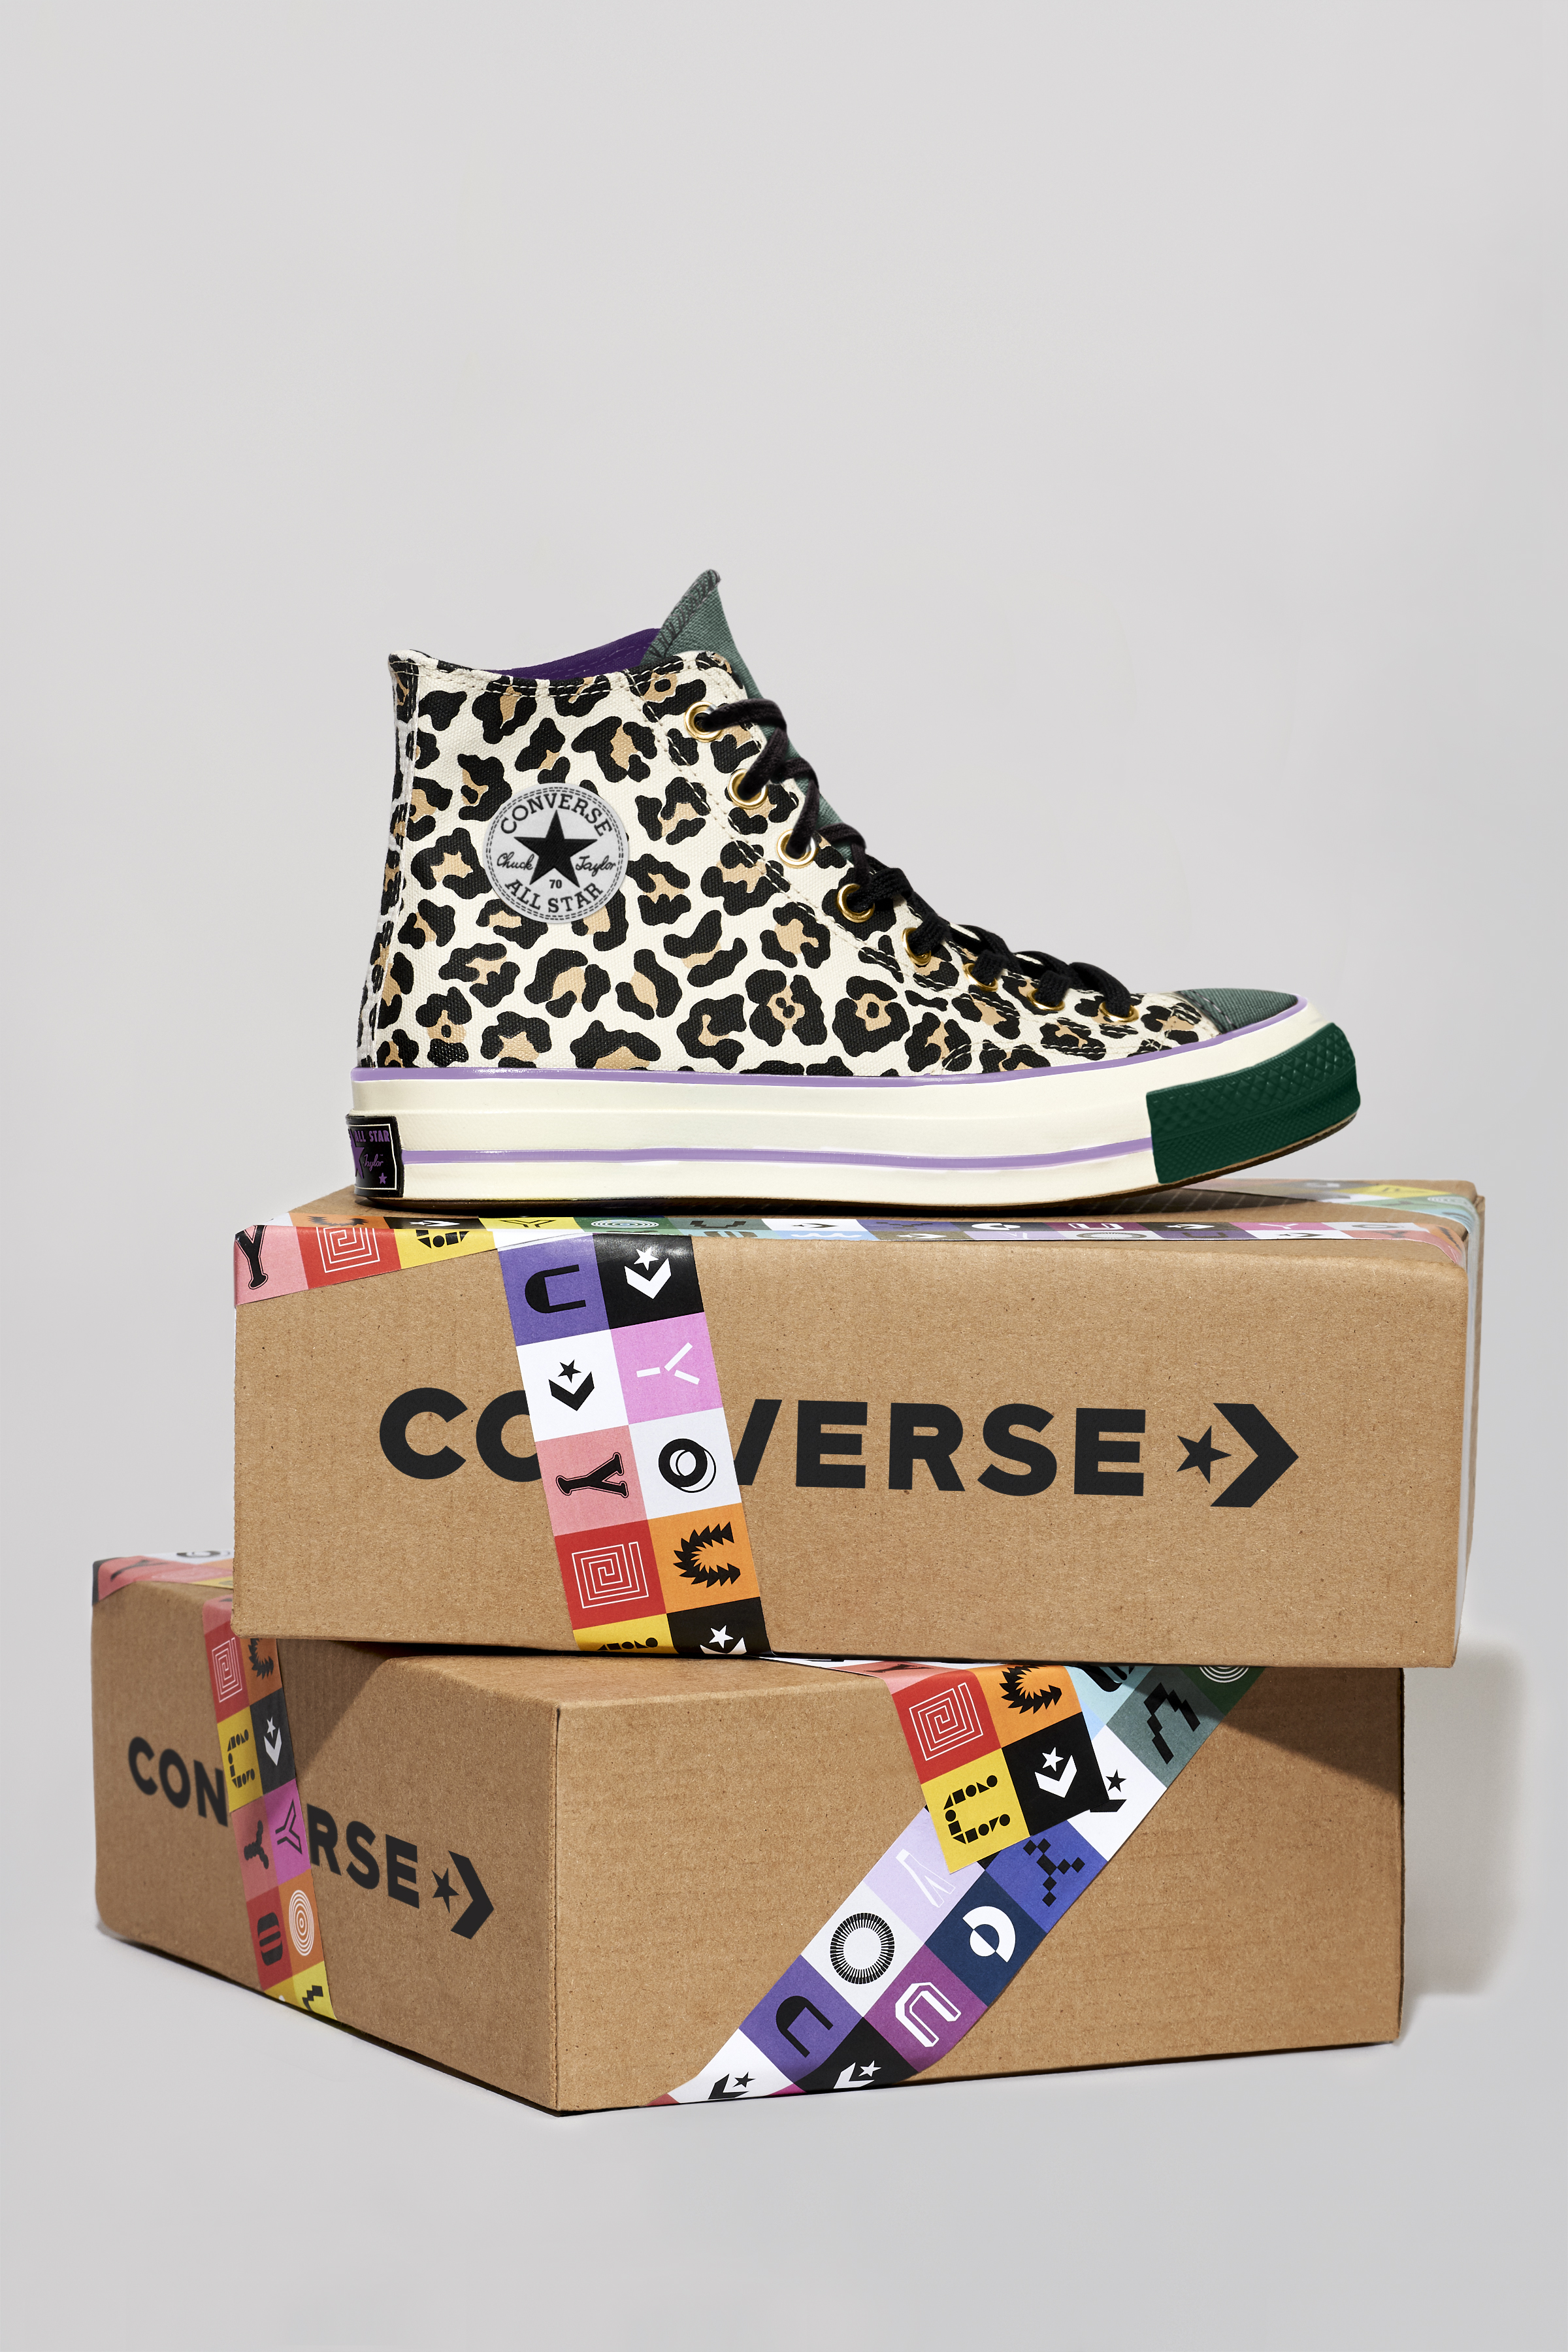 Converse By You - Weekday Studio